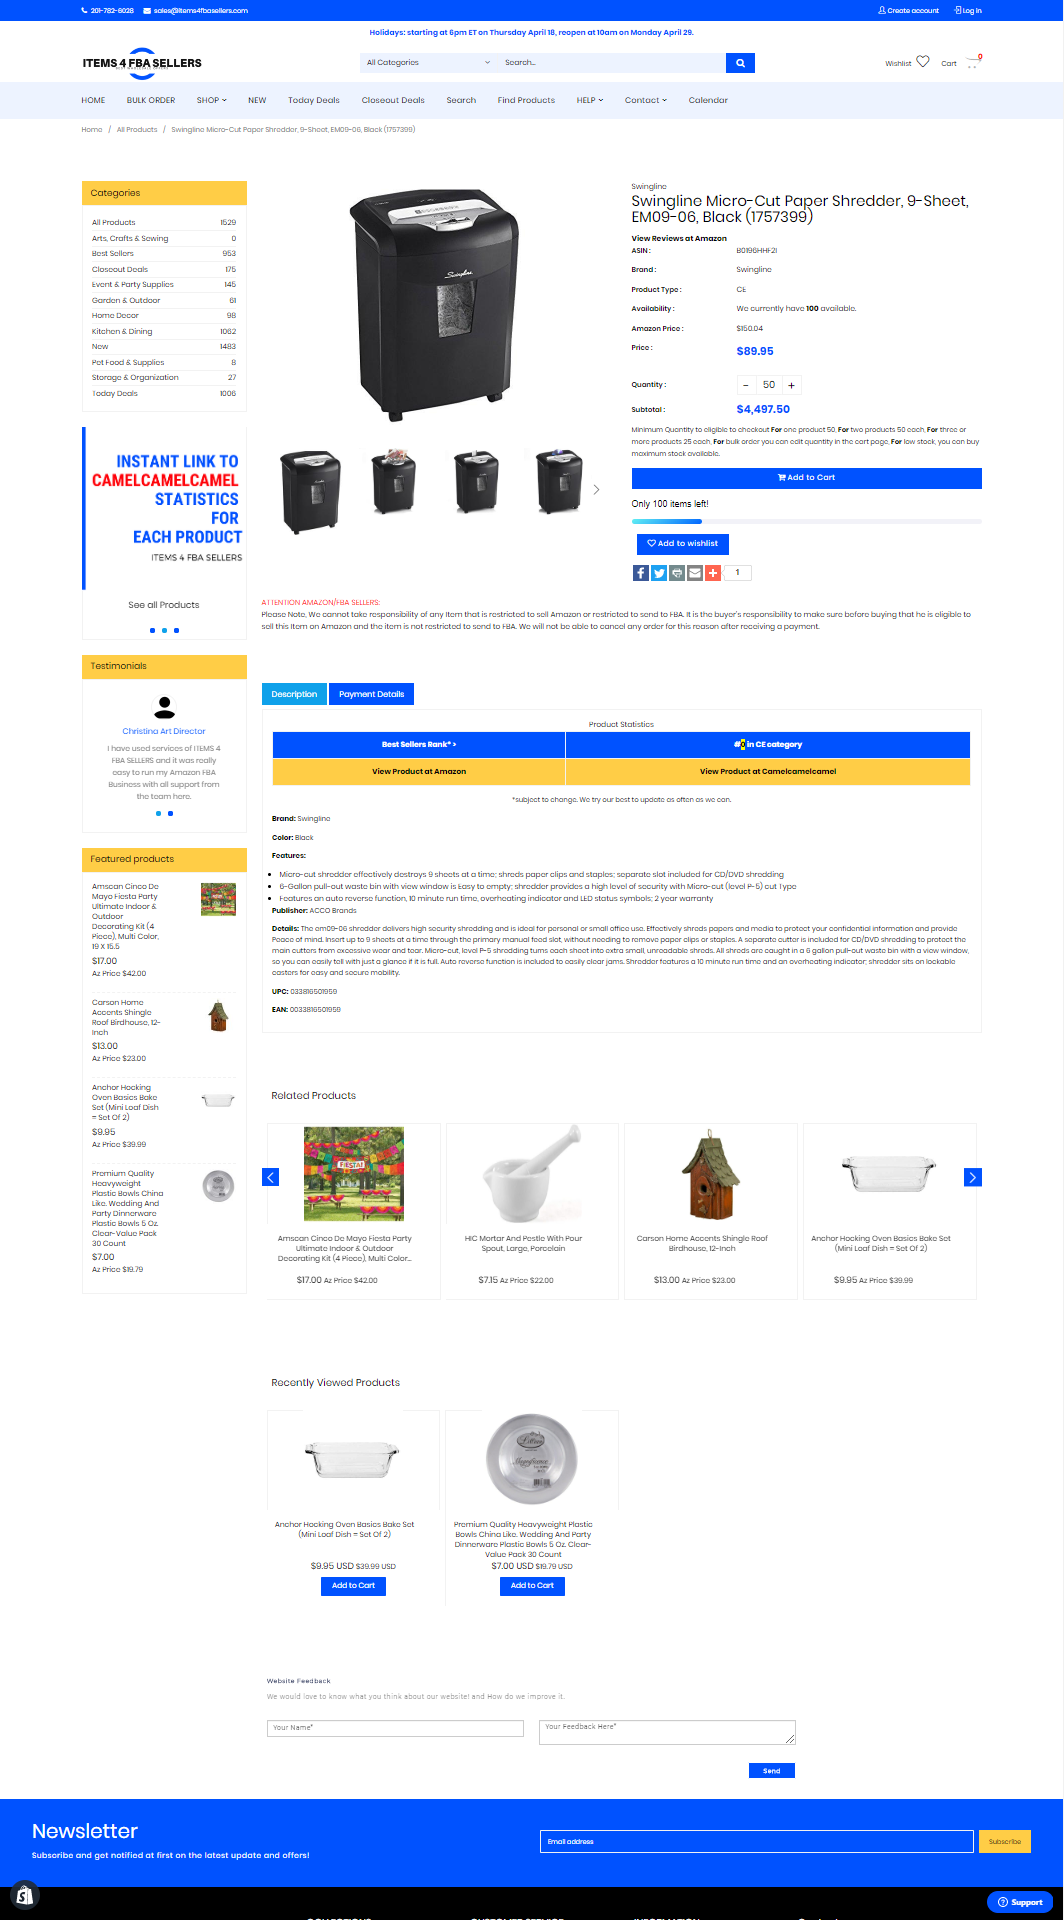 Shopify Wholesale store design with full customization - 2019